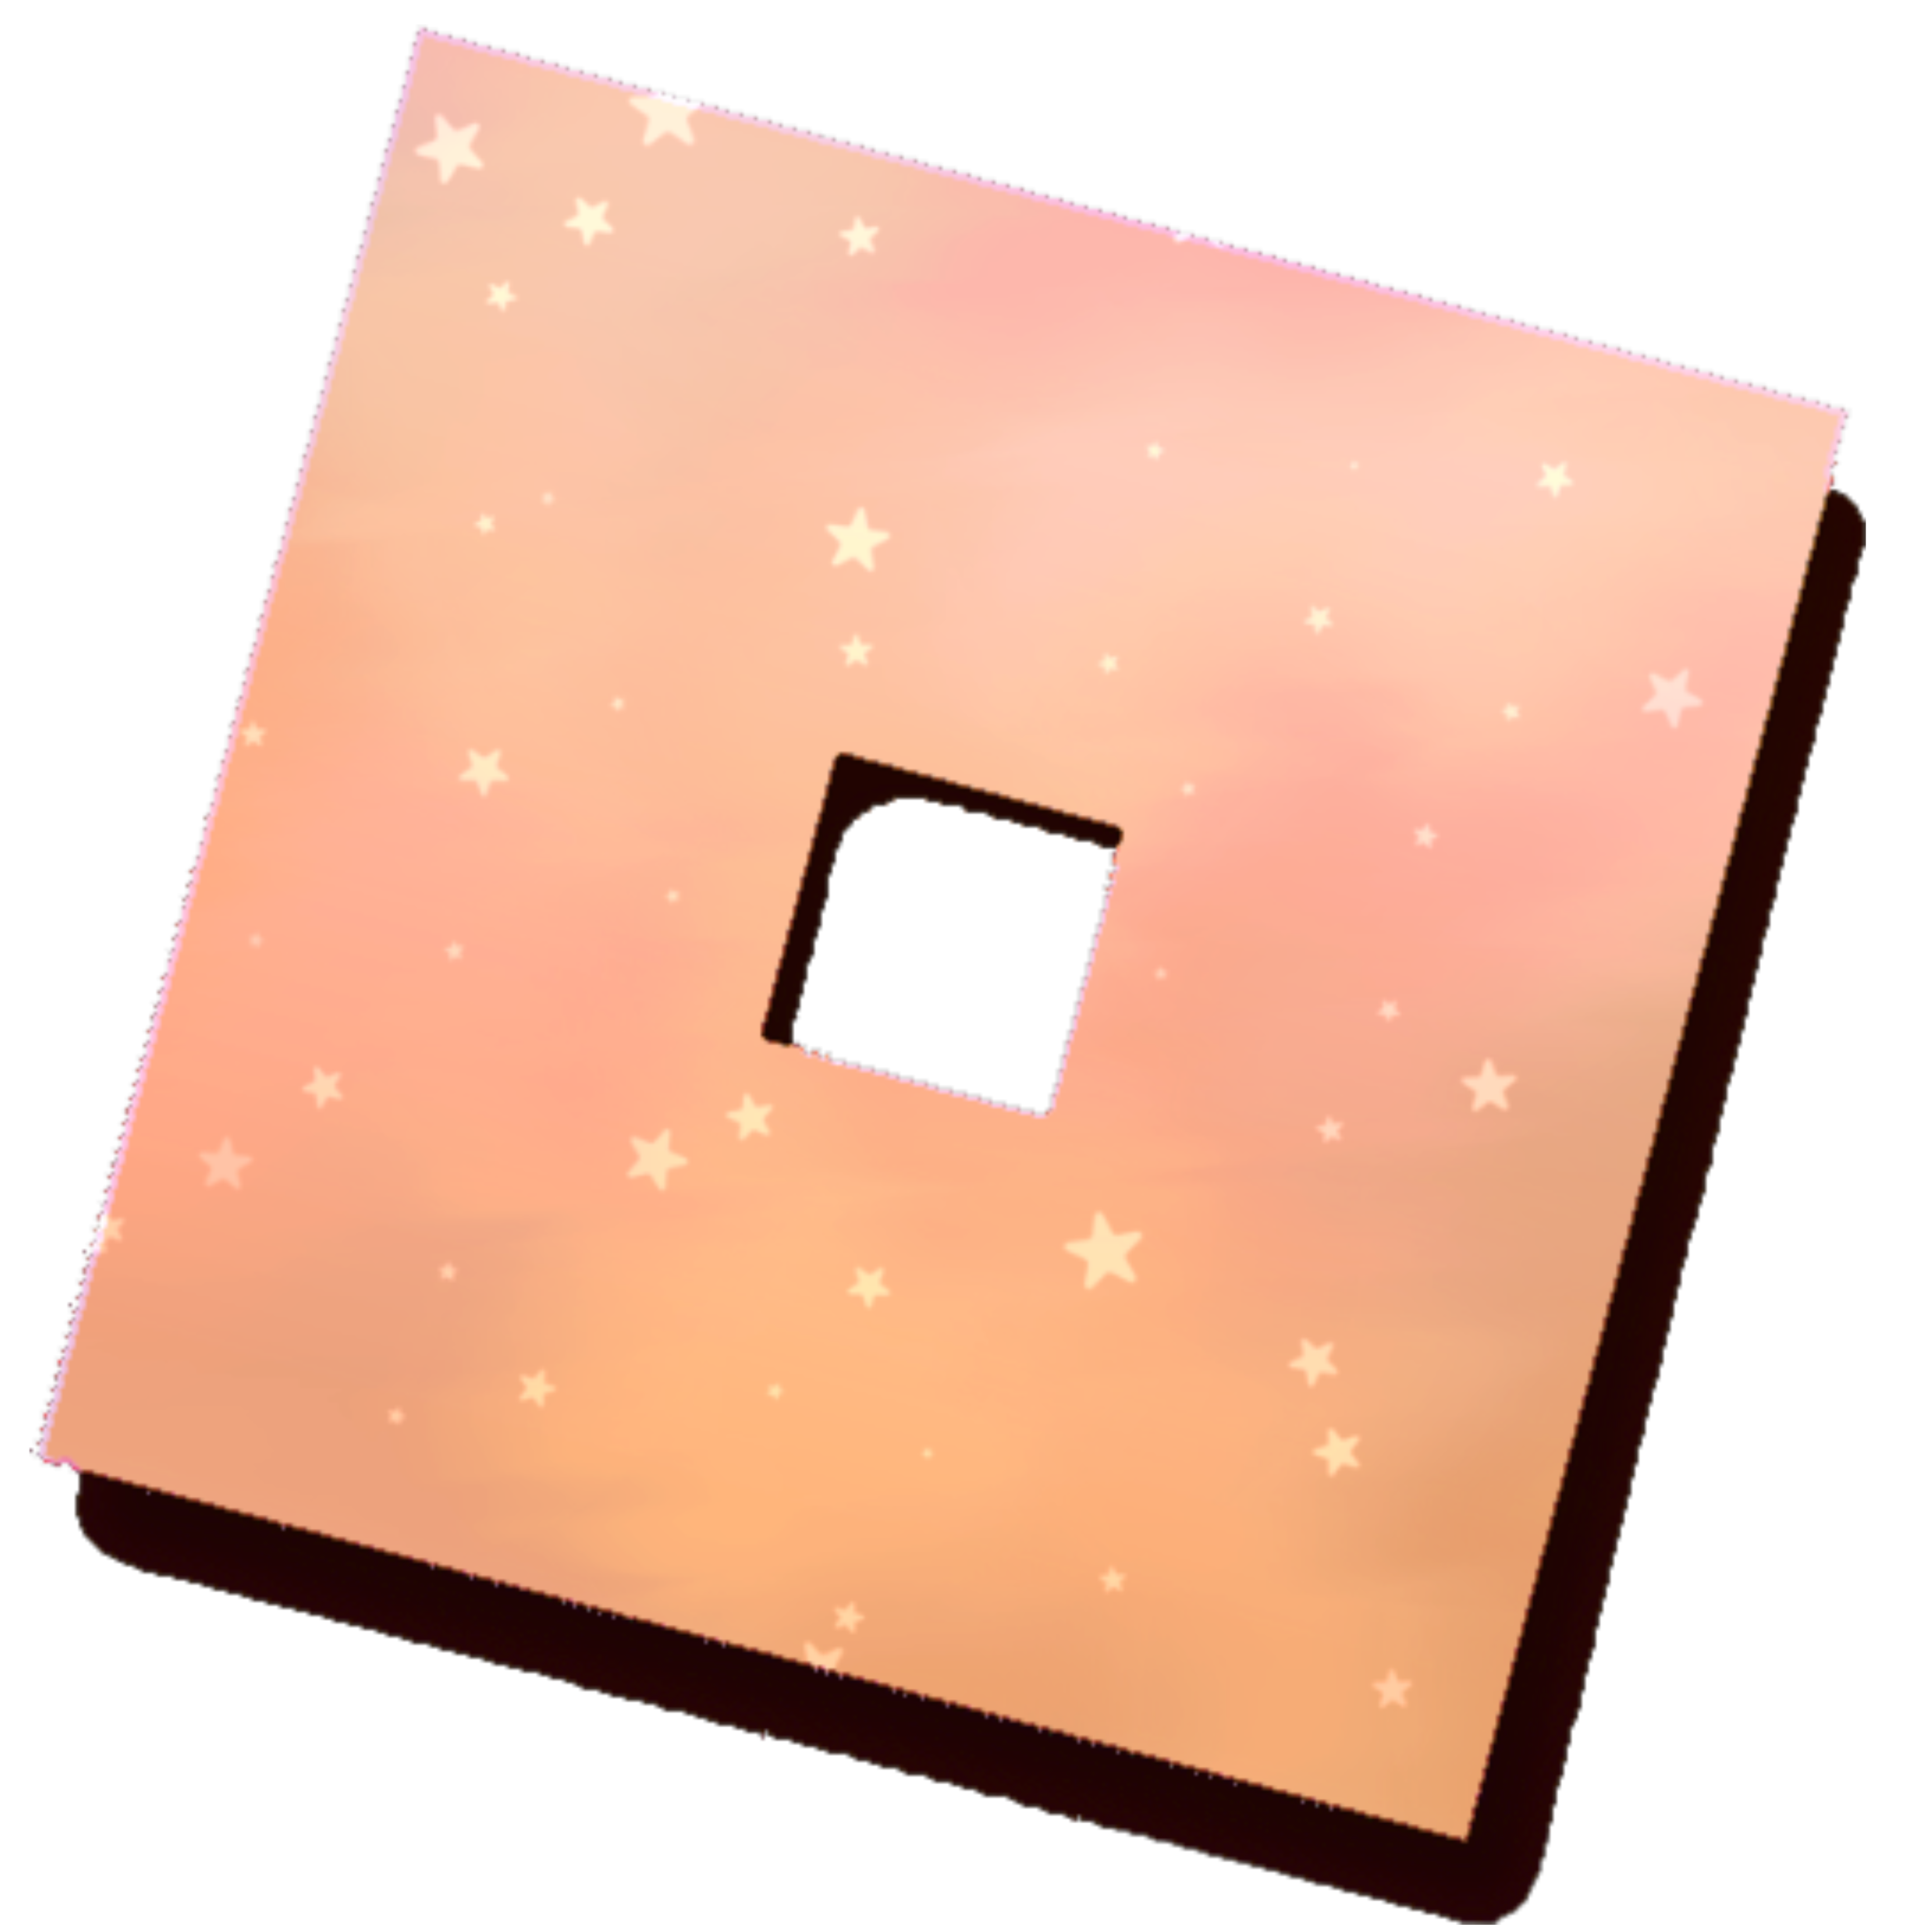 Sticker By That Girl That Got Famous With Stickers - cool galaxy roblox logo